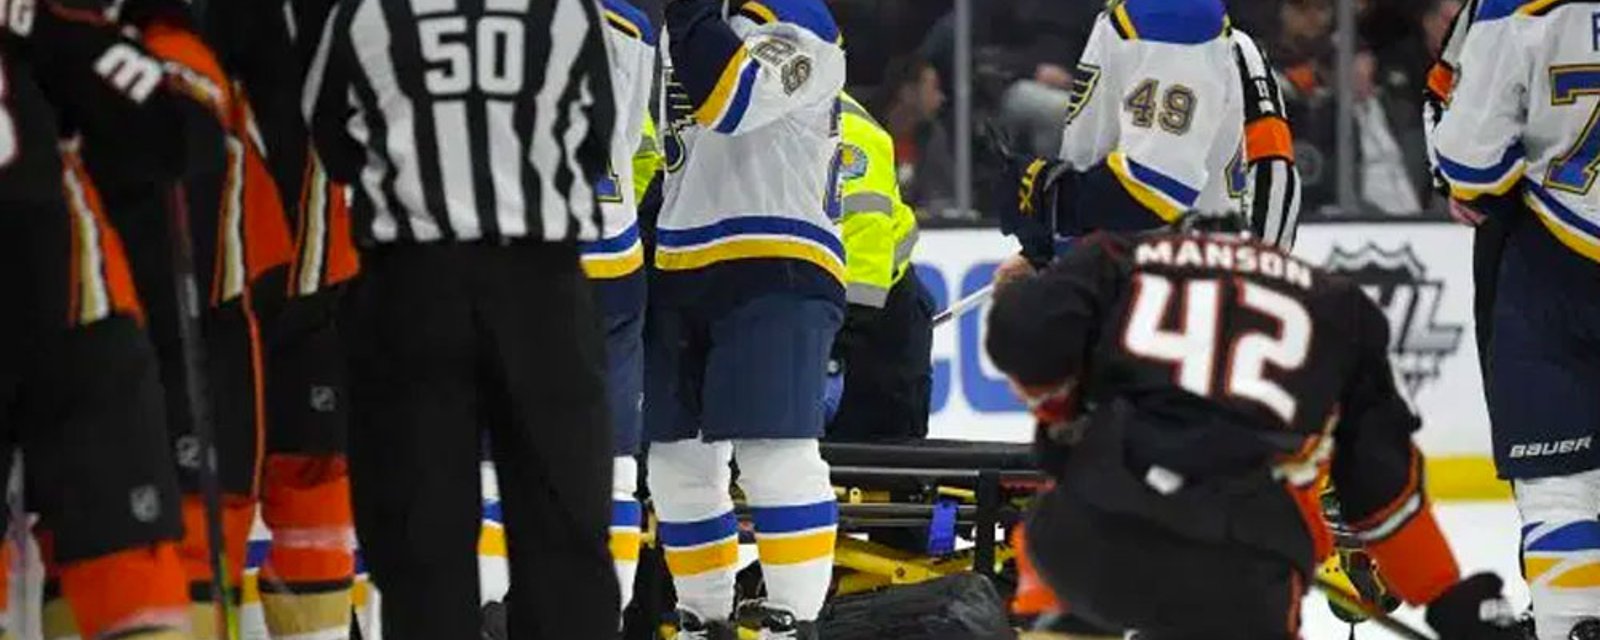 NHL makes stunning statement on game in which Bouwmeester collapsed 